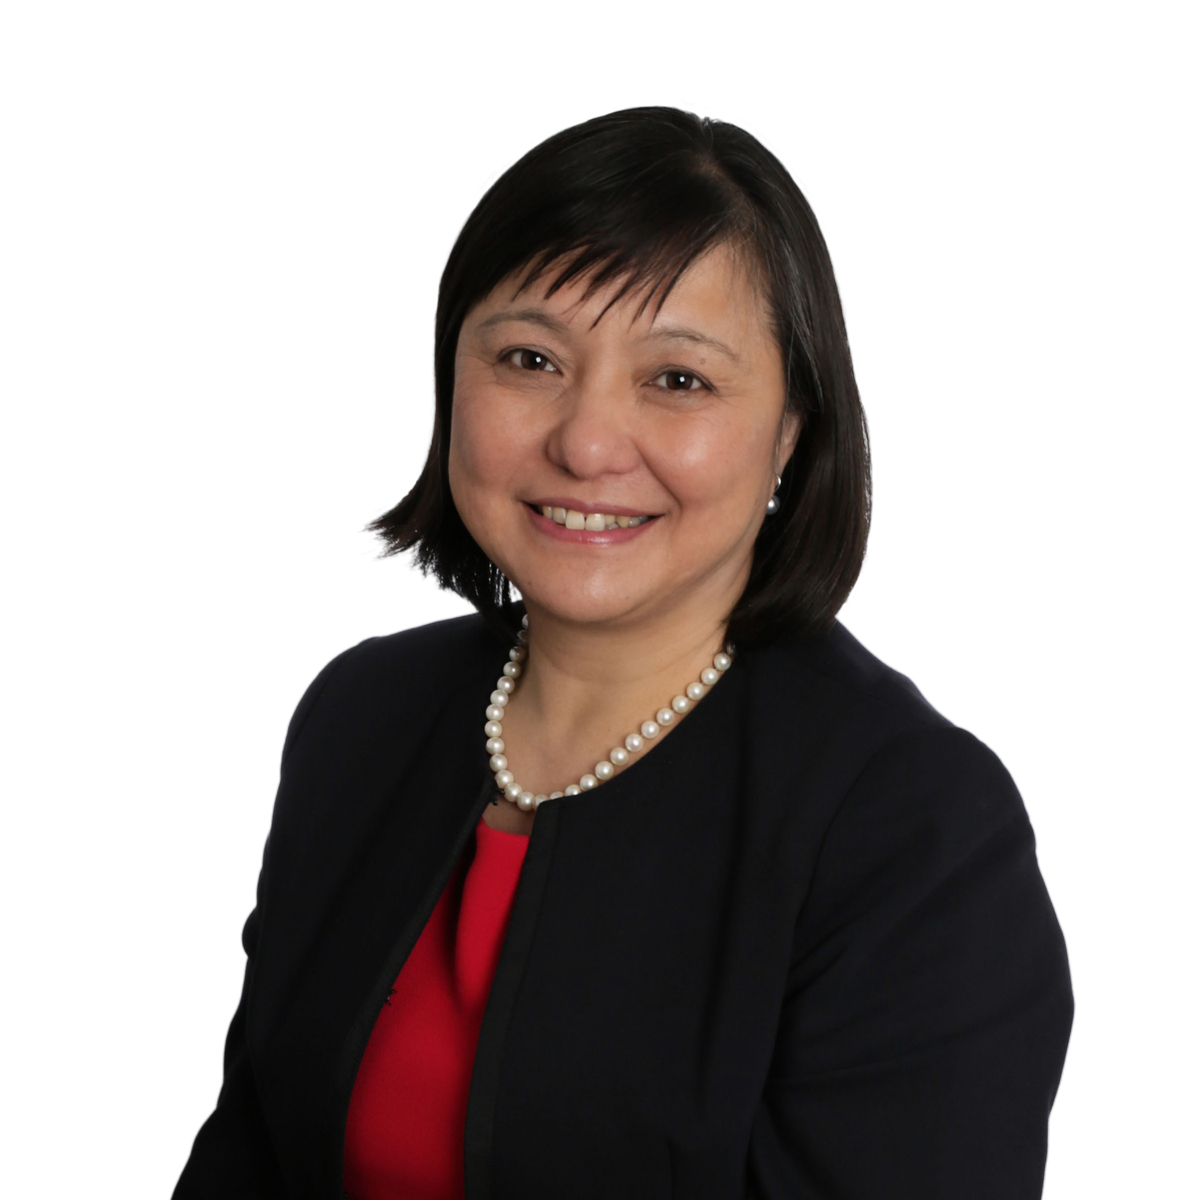 4. Ming Tang, chief data and analytics officer, NHS England